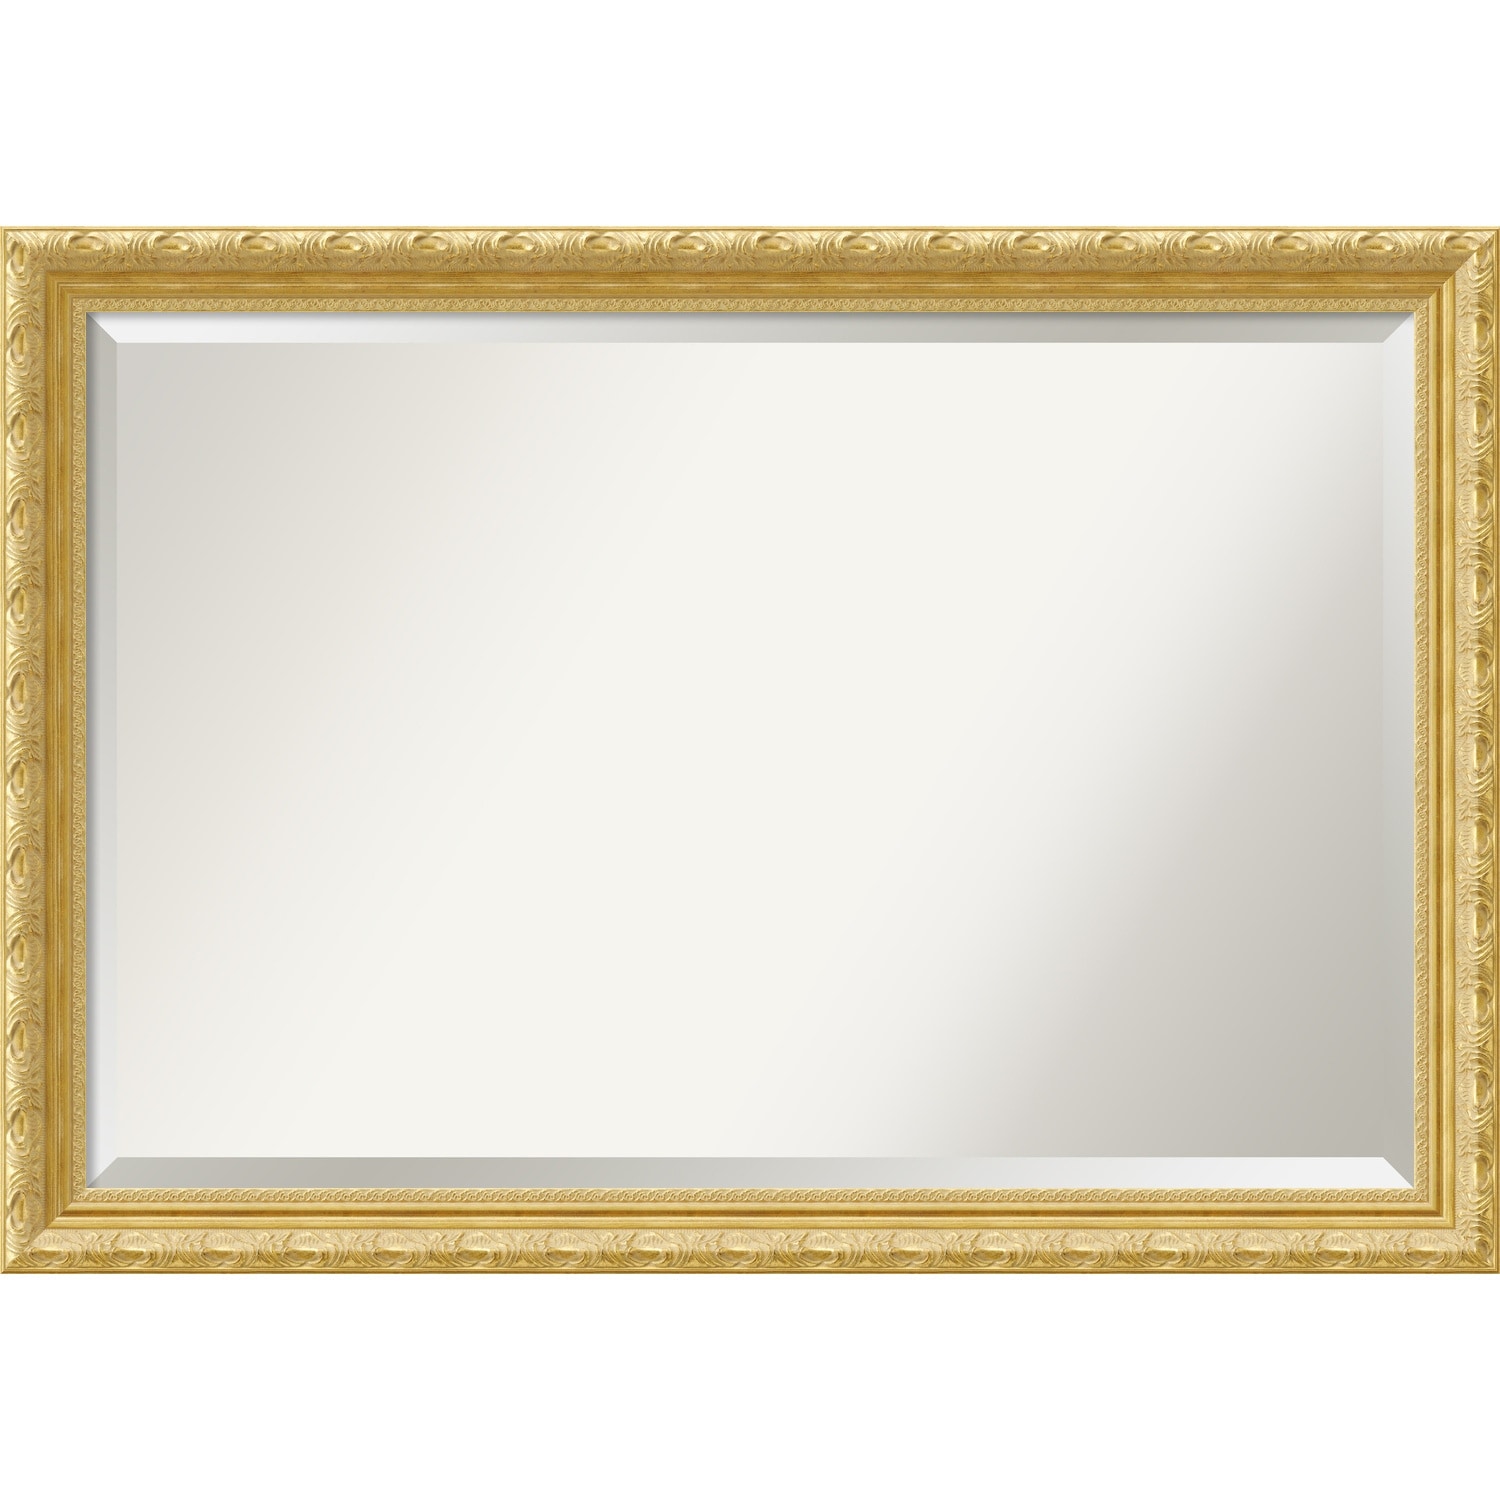 Beveled Wood Bathroom Wall Mirror Versailles Gold Frame Outer Size: 40  x 28 in On Sale Bed Bath  Beyond 15368812